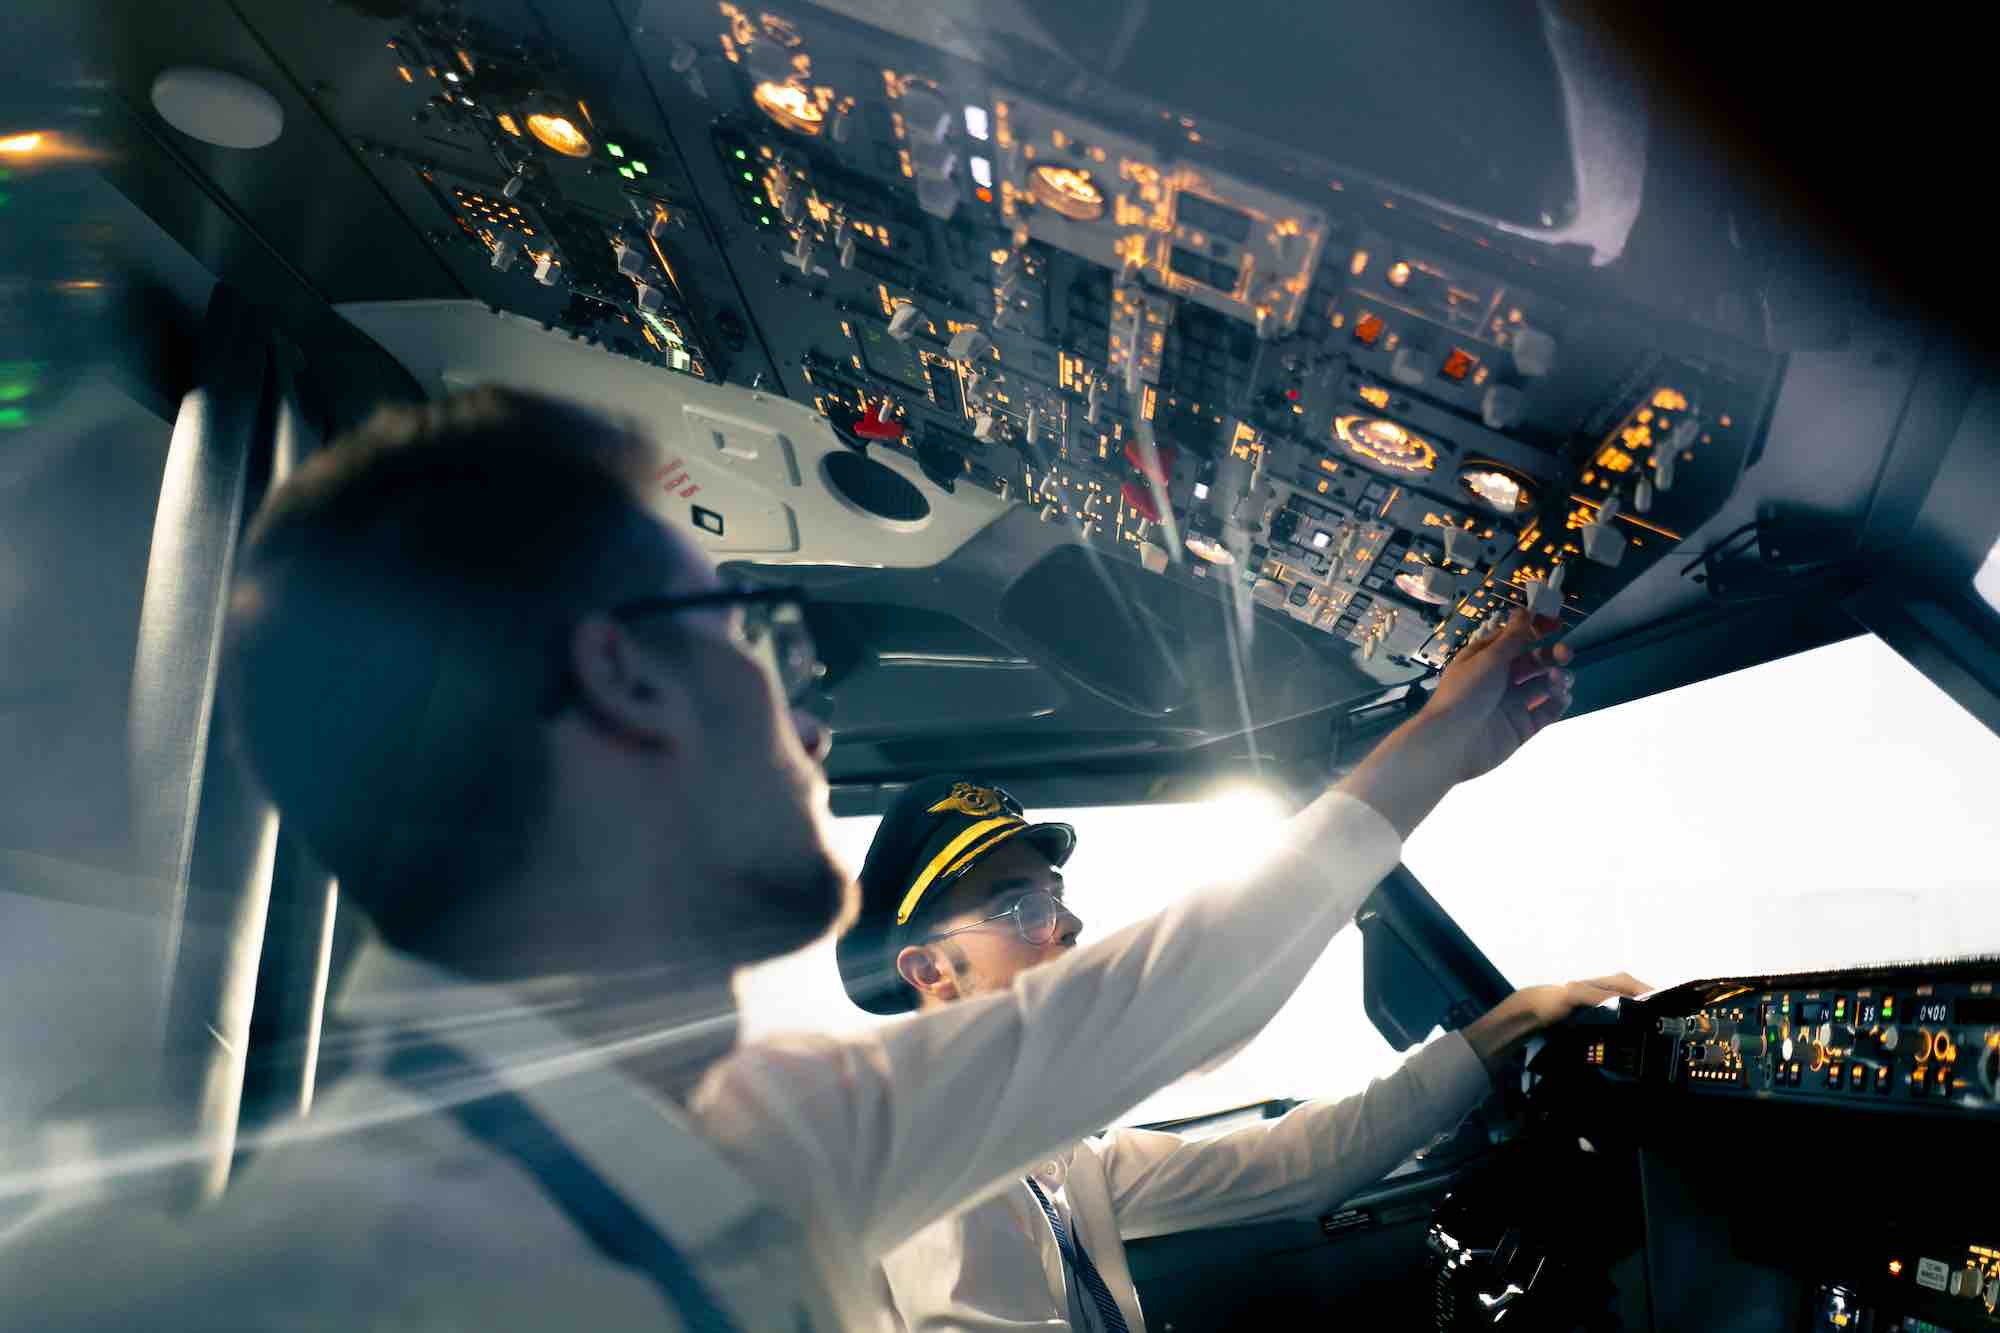 Two pilots in cockpit with the nearest pilot reaching for controls on the overhead boards.